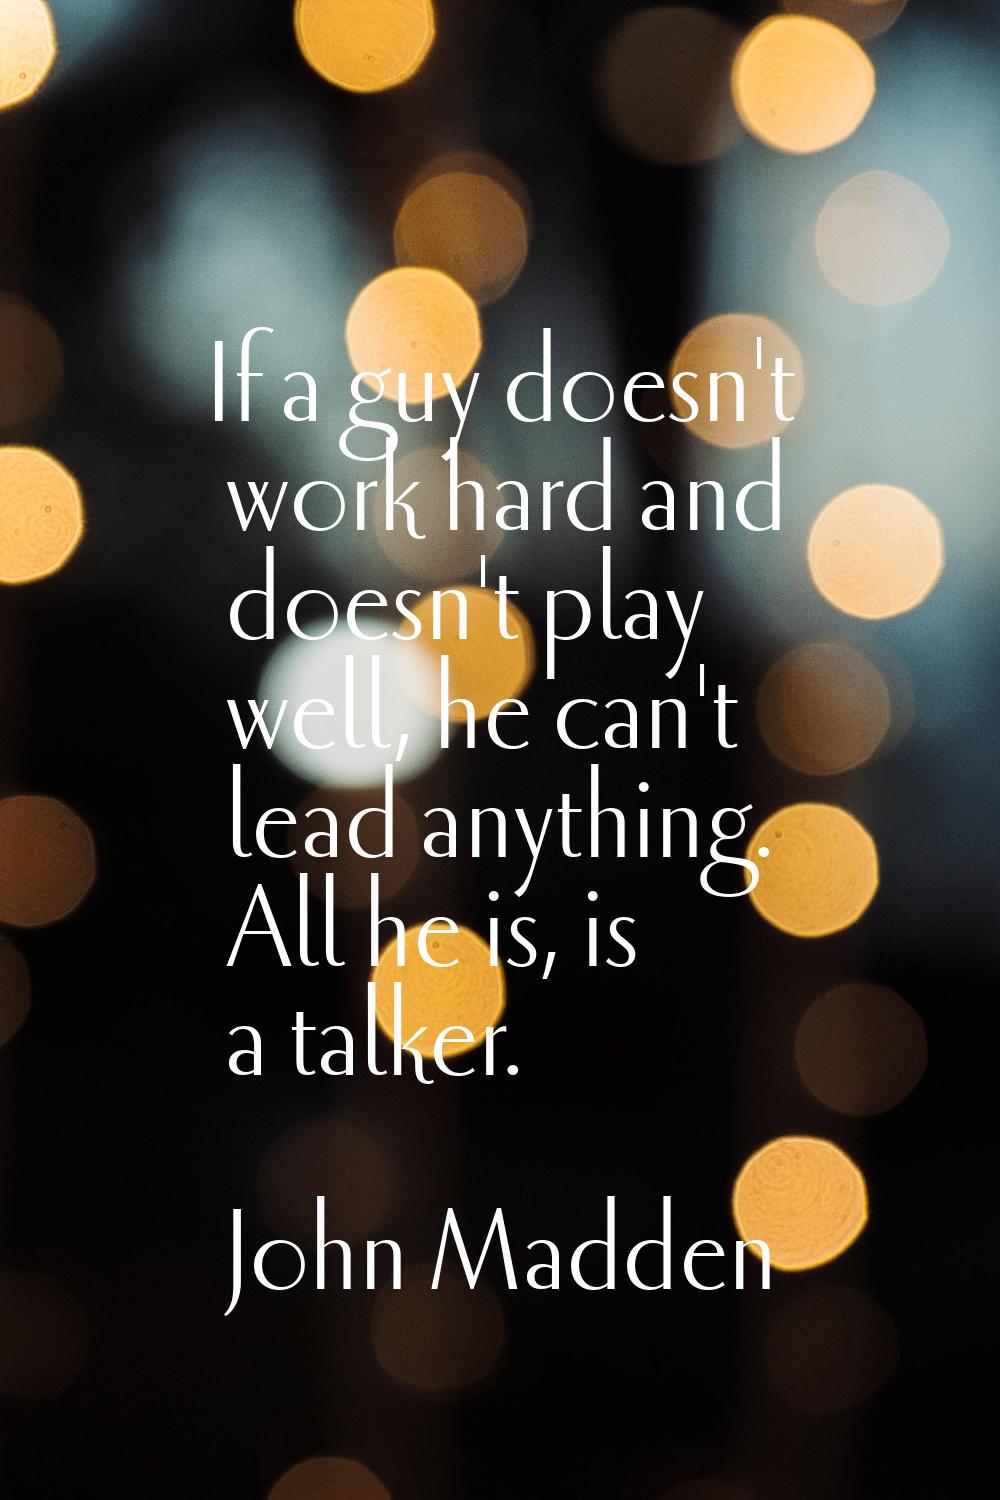 If a guy doesn't work hard and doesn't play well, he can't lead anything. All he is, is a talker.